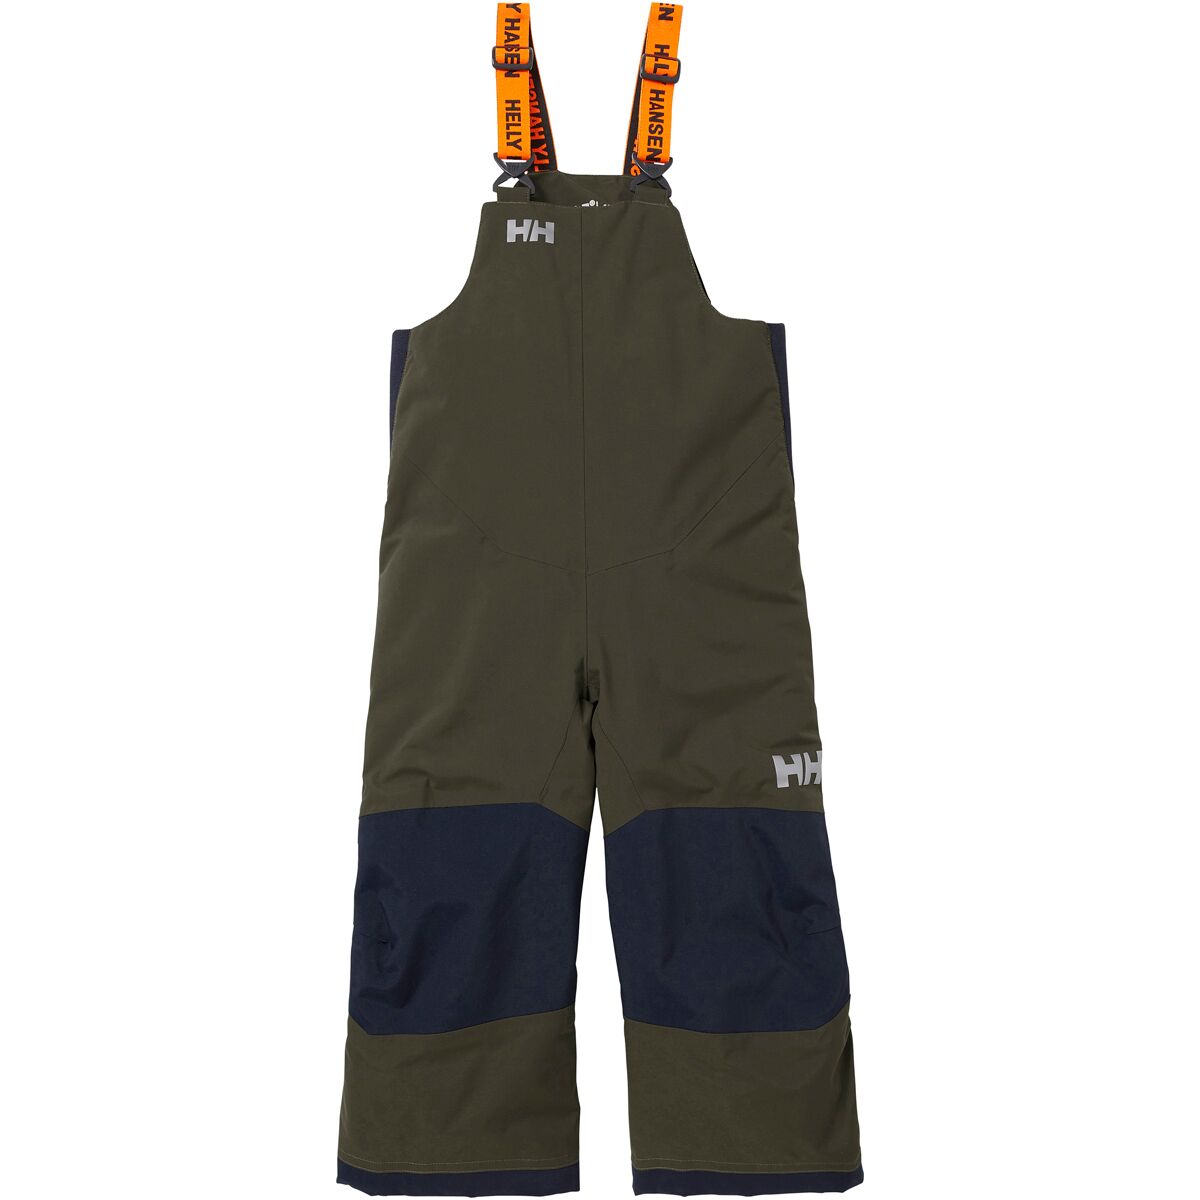 Helly Hansen Rider 2 Insulated Bib Pant - Toddlers'